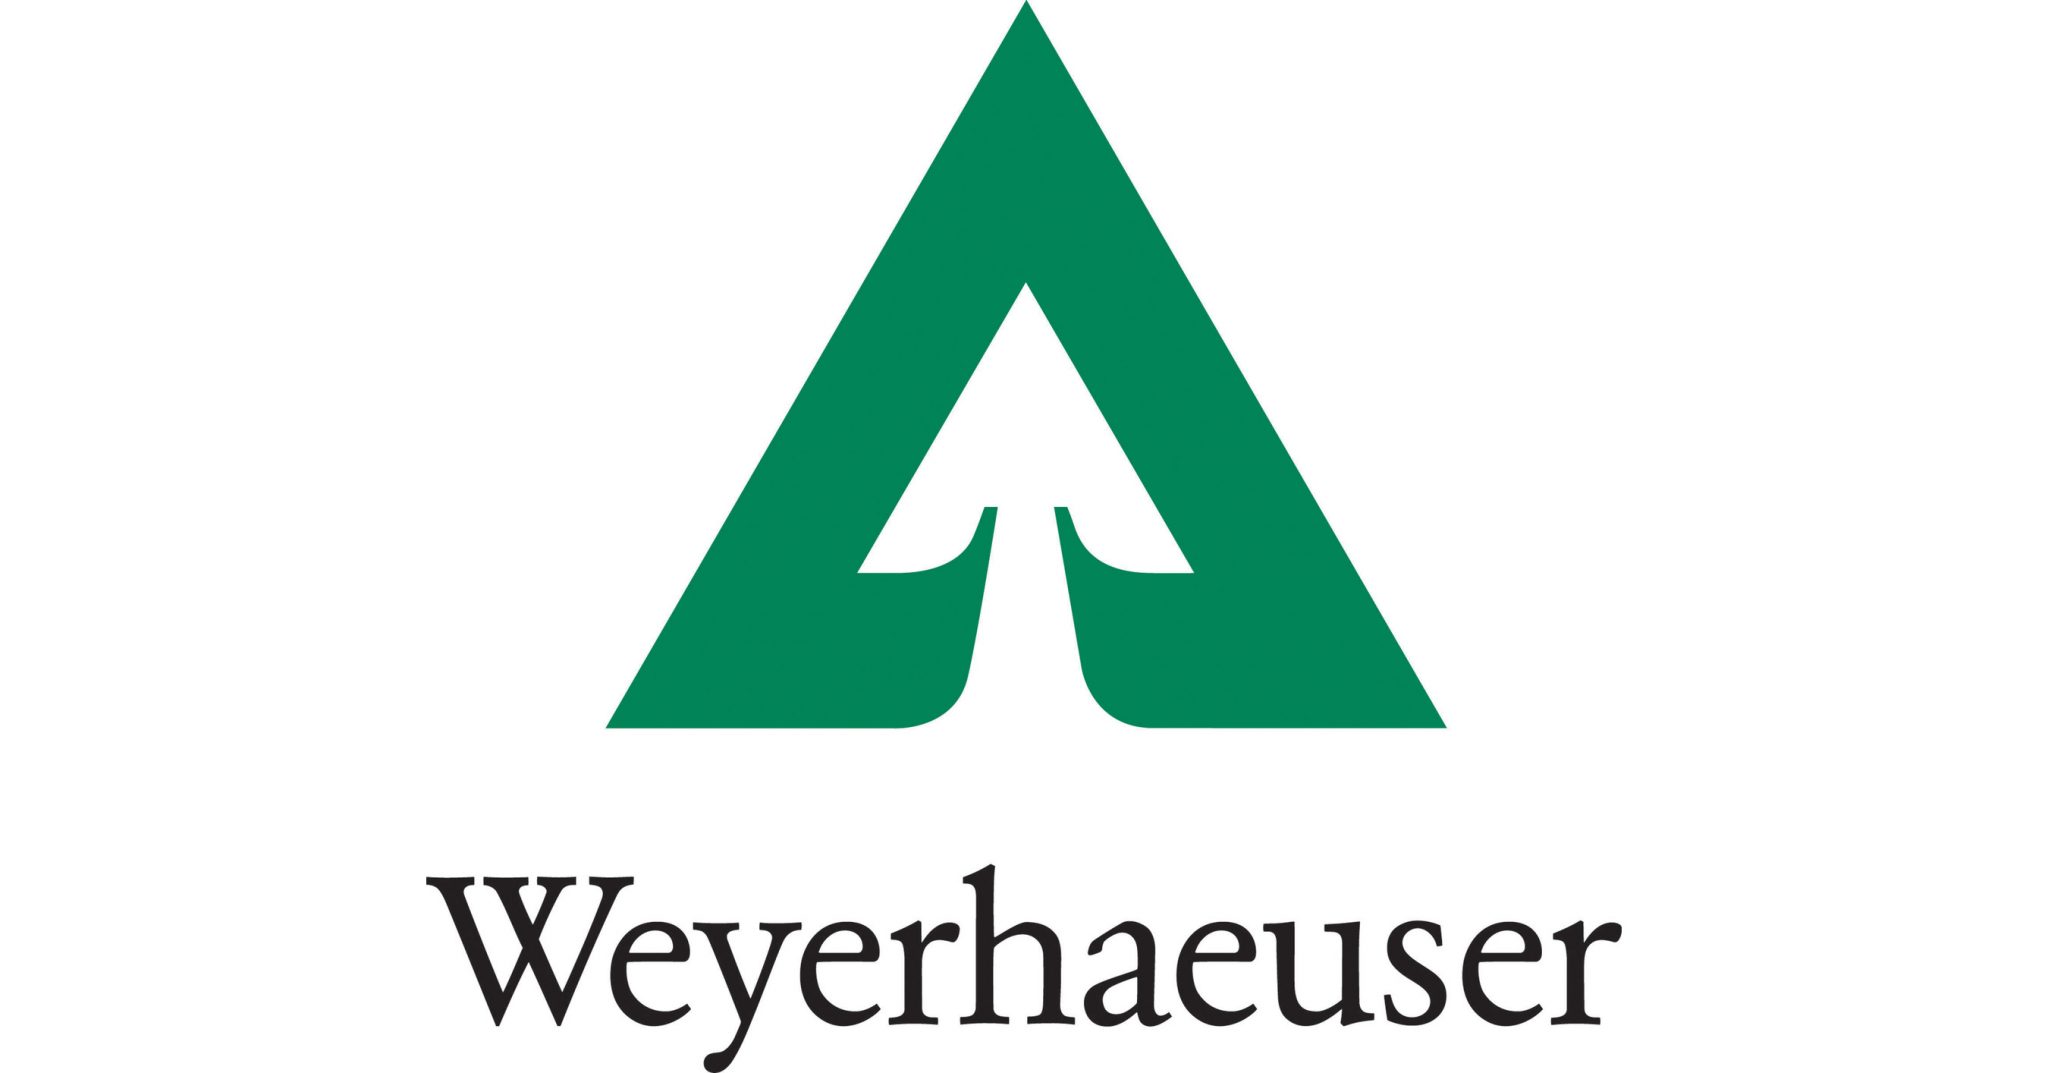 weyerhaeuser-reports-292m-in-net-earnings-for-q4-2020-wood-business